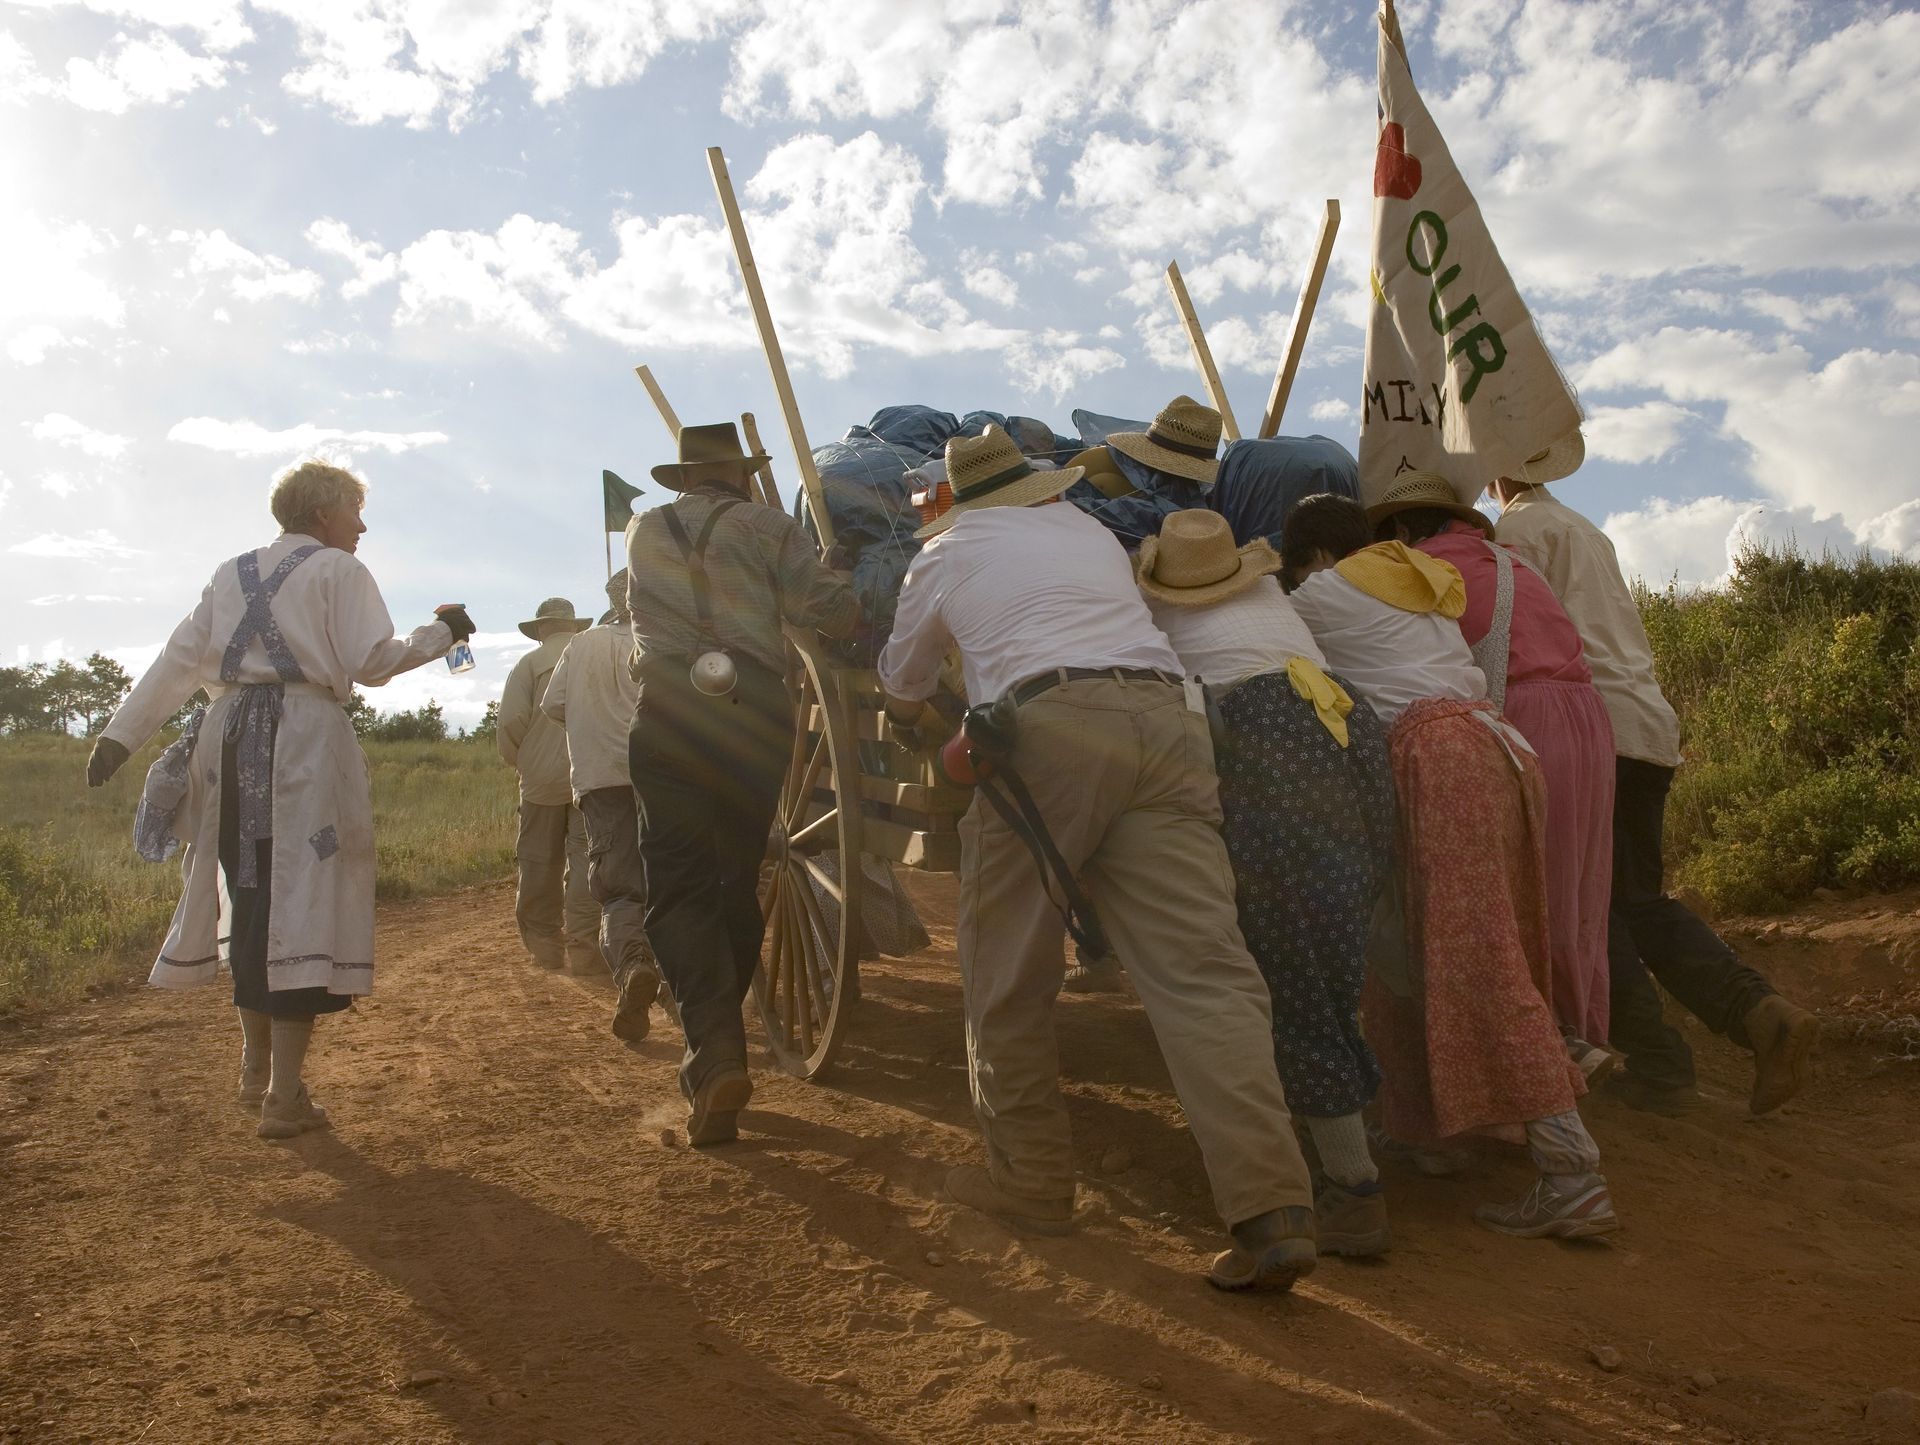 A large family helps push a handcart over a dusty path.